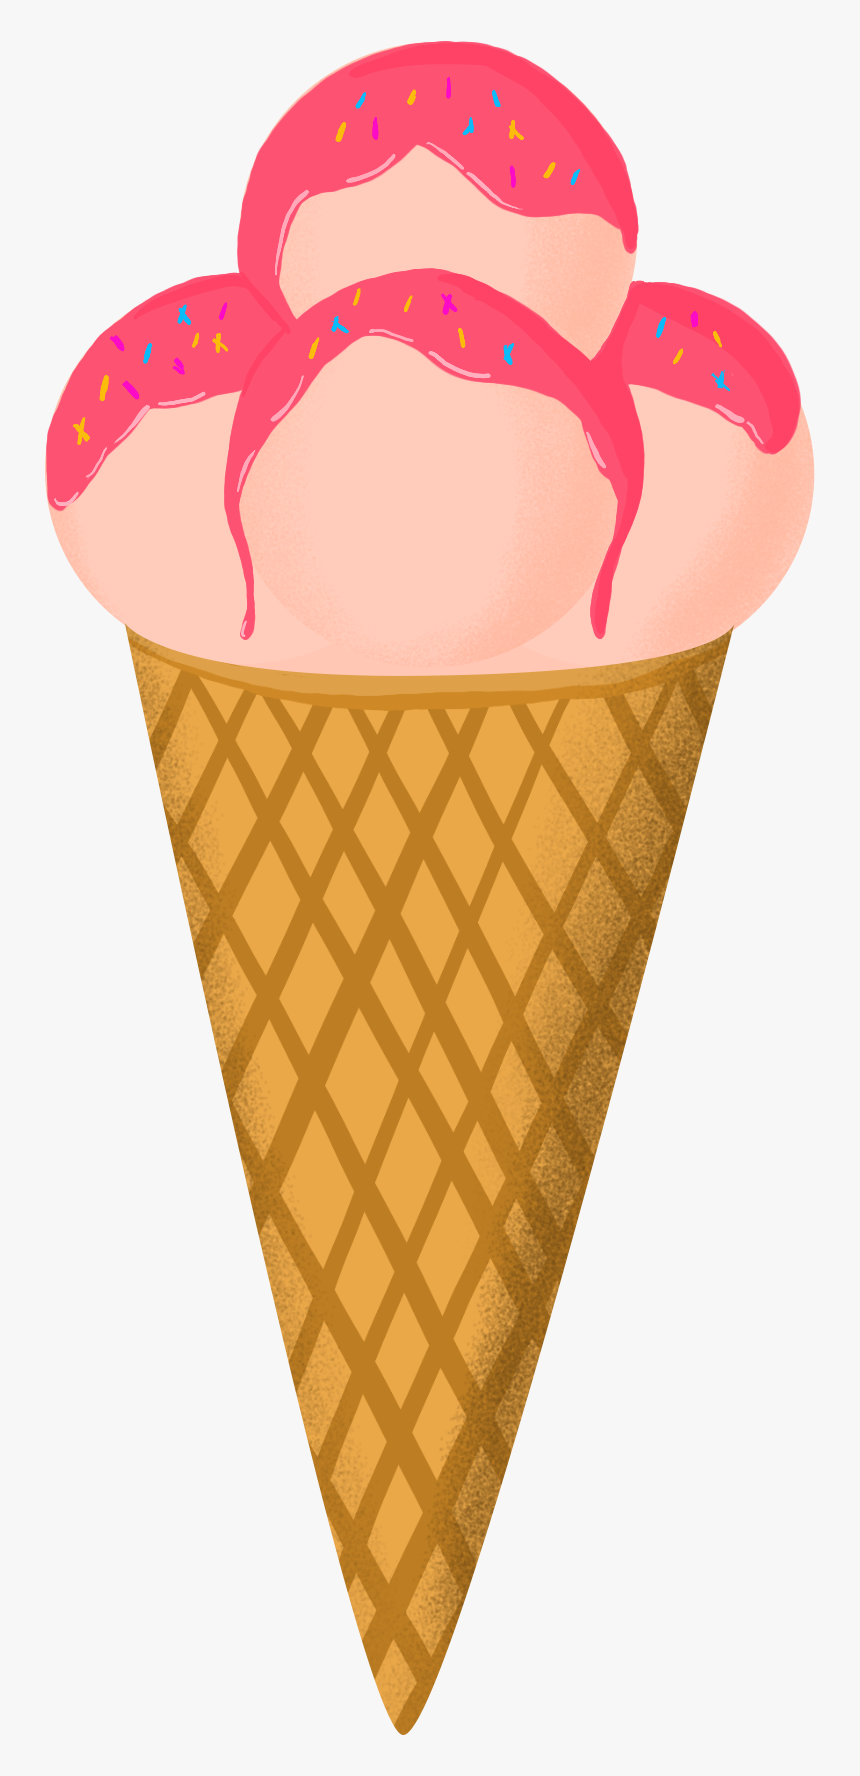 Strawberry Ice Cream Png - Ice Cream Cone, Transparent Png, Free Download